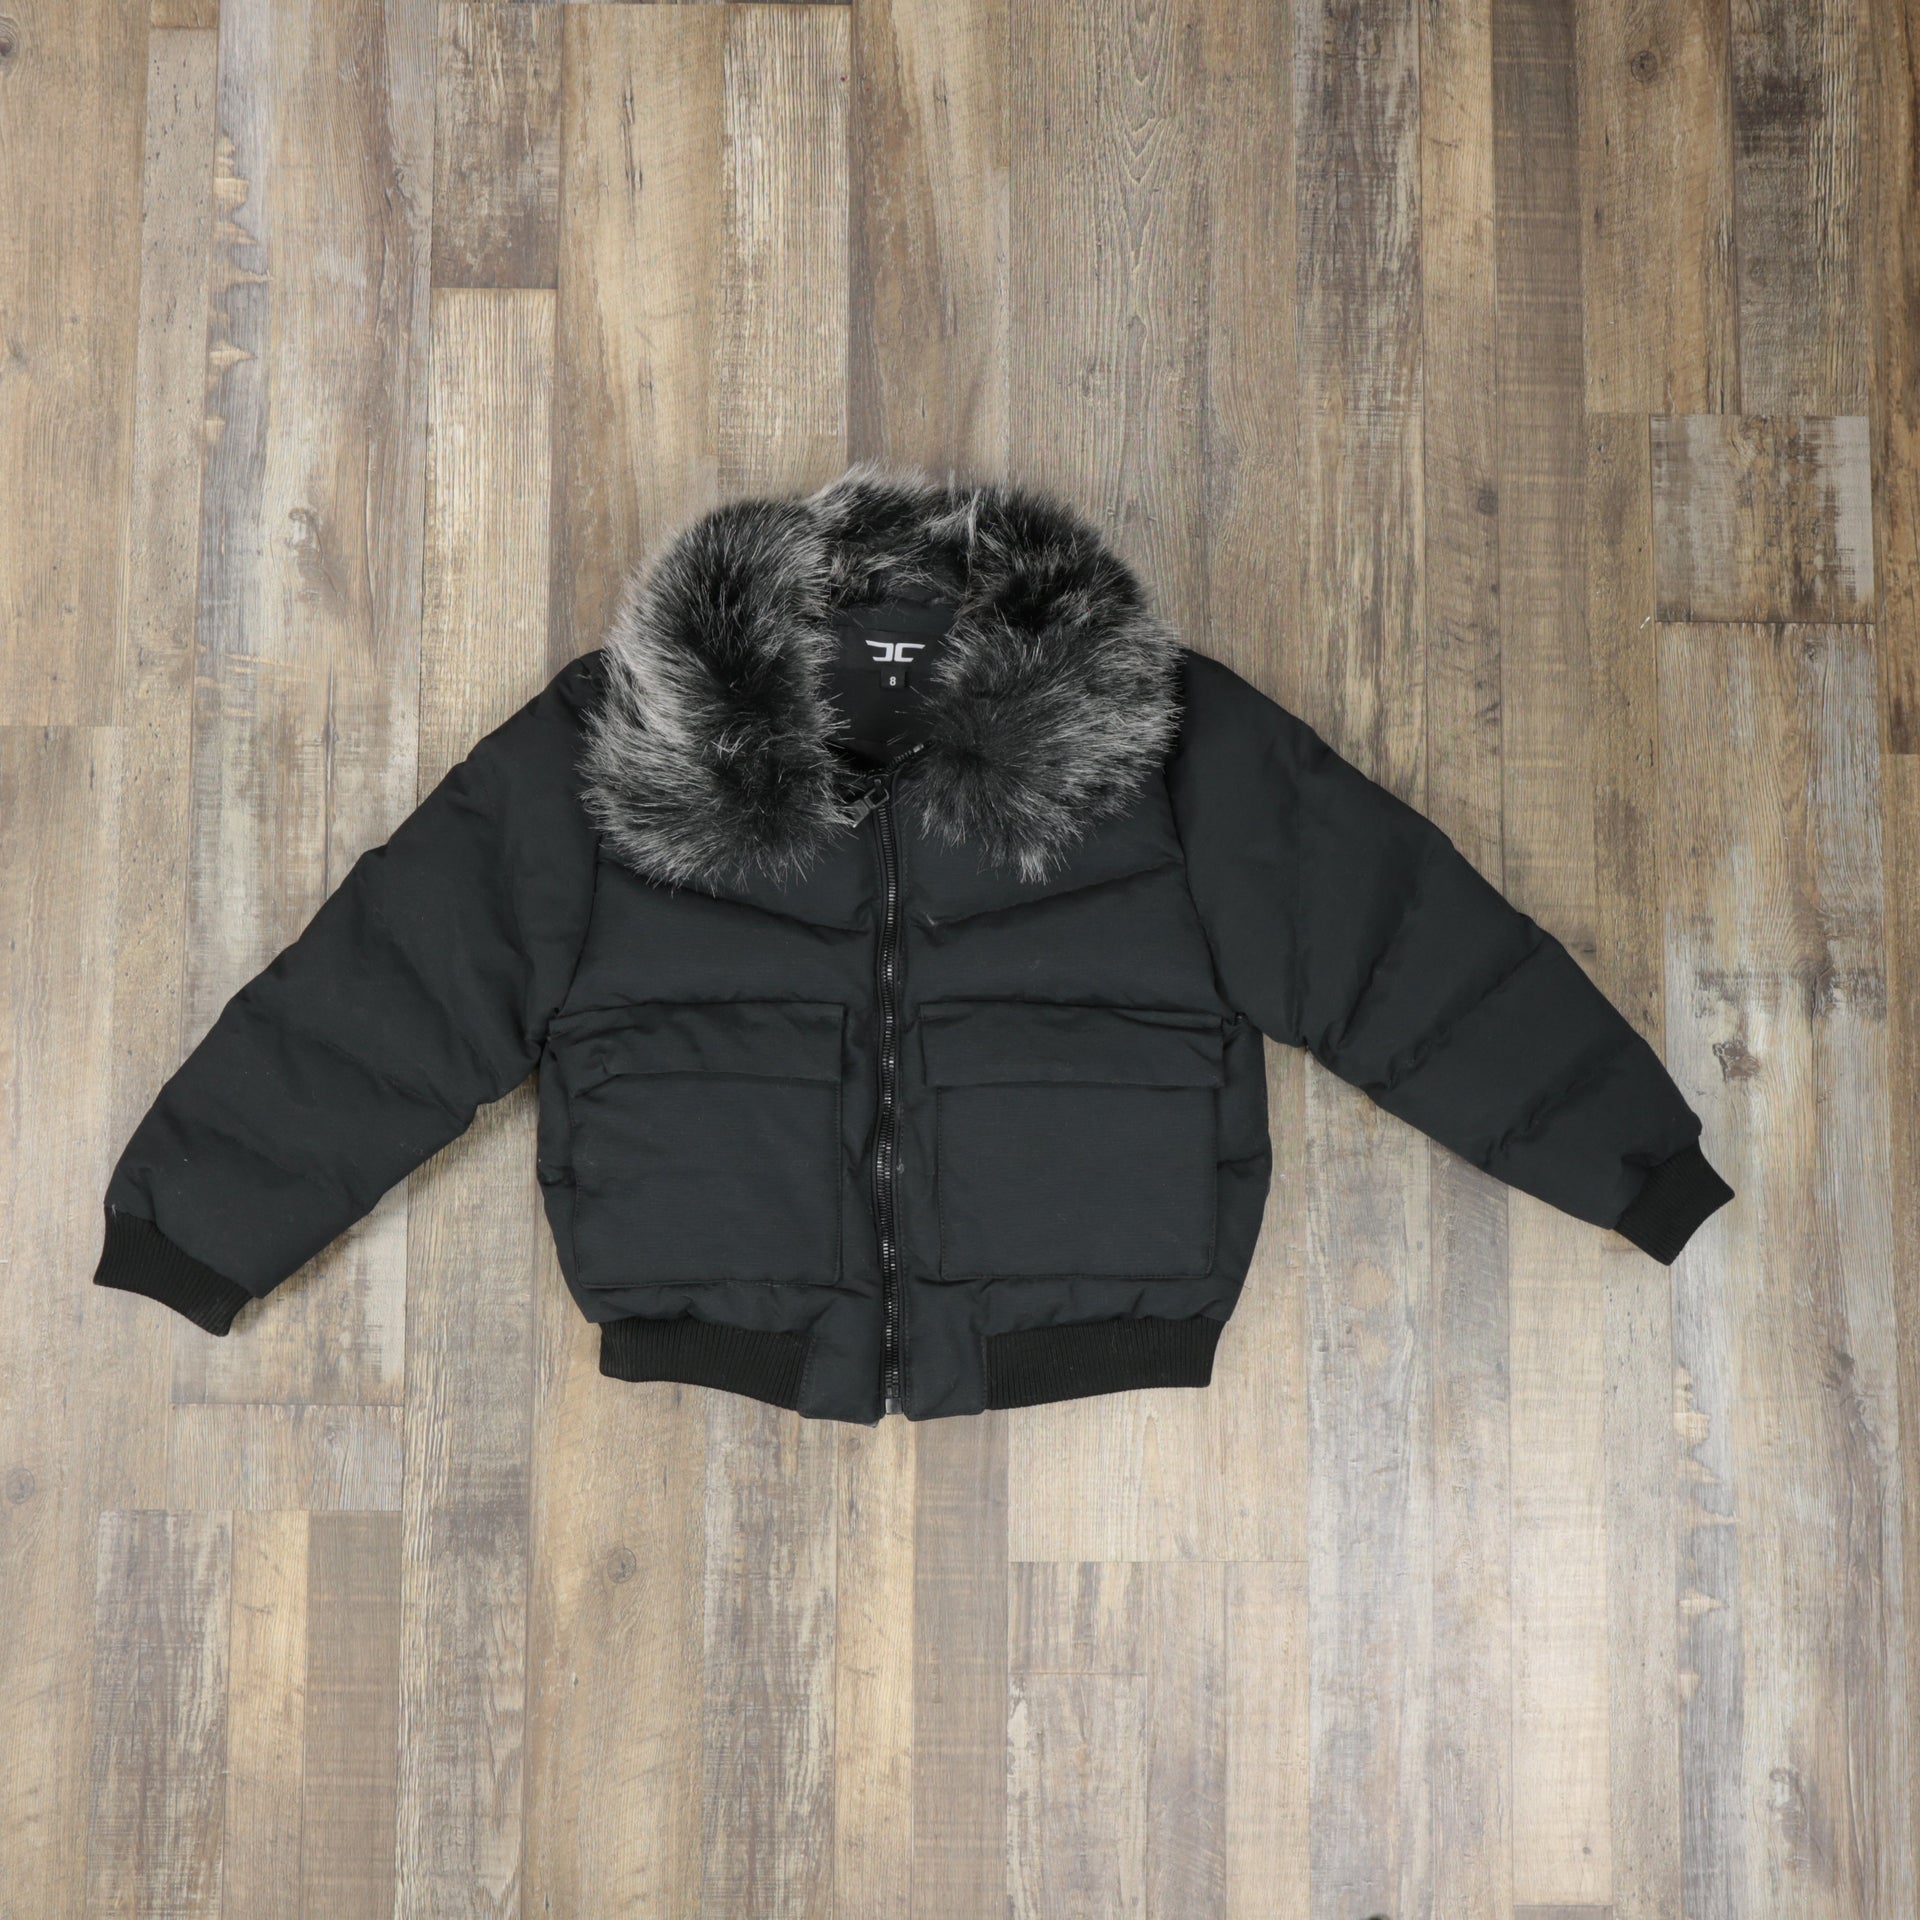 front of the jacket with no hood Youth Black Bubble Puffer Parka Jacket With Removable Faux Fur Hood (Vegan Fur)